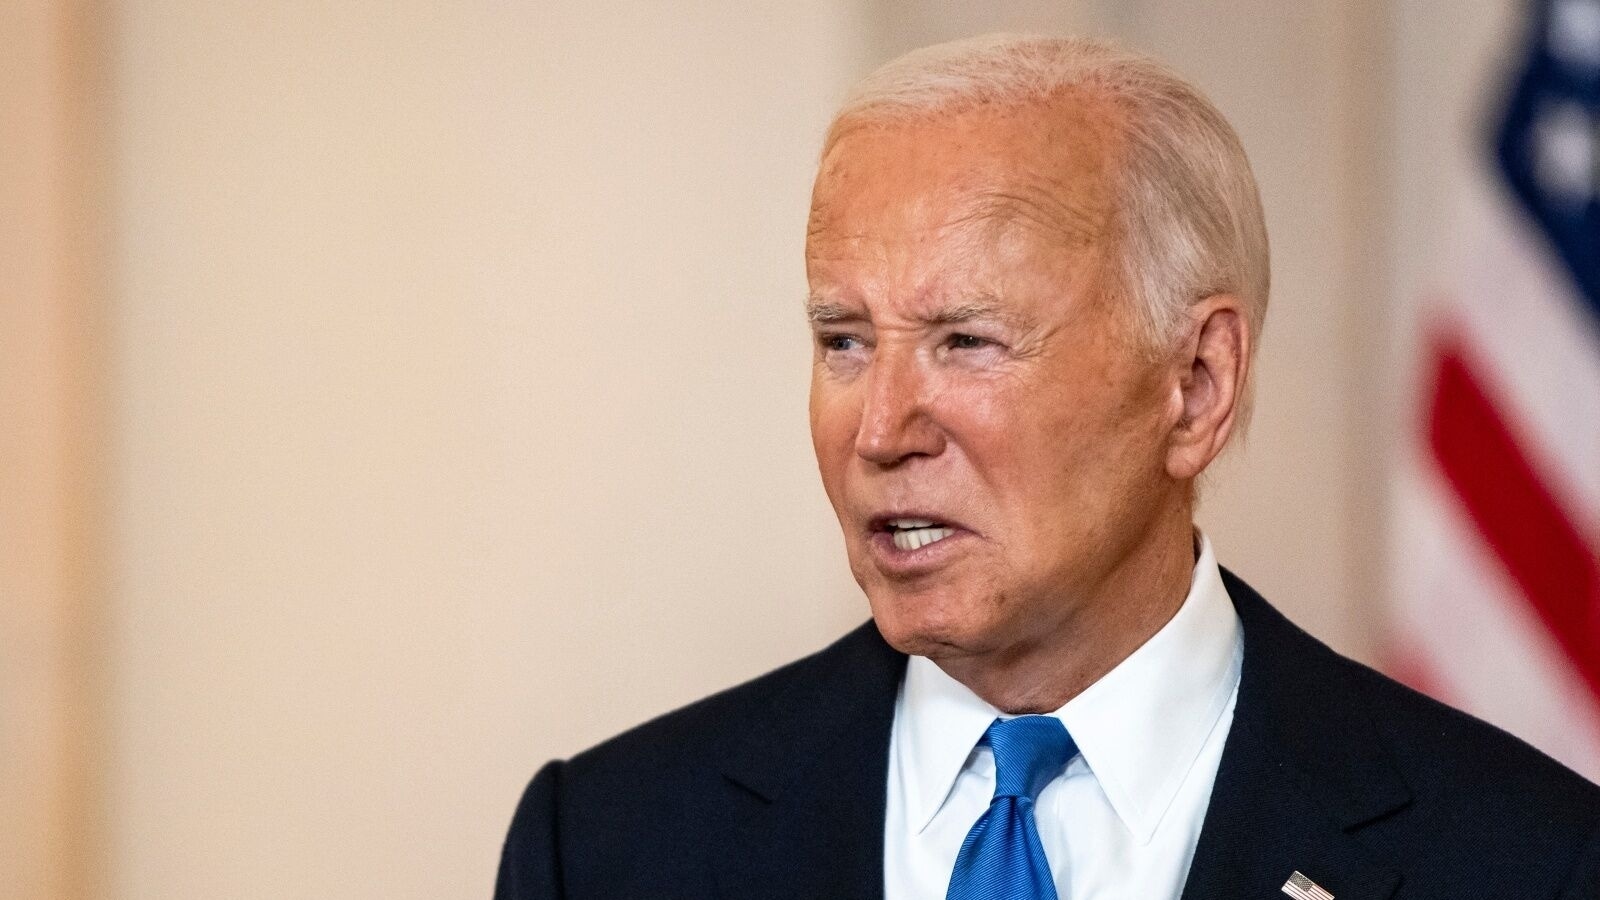 Joe Biden attempts to dispel worry about his debate performace in new ad: ‘I’m not a young man, but I know how to…’